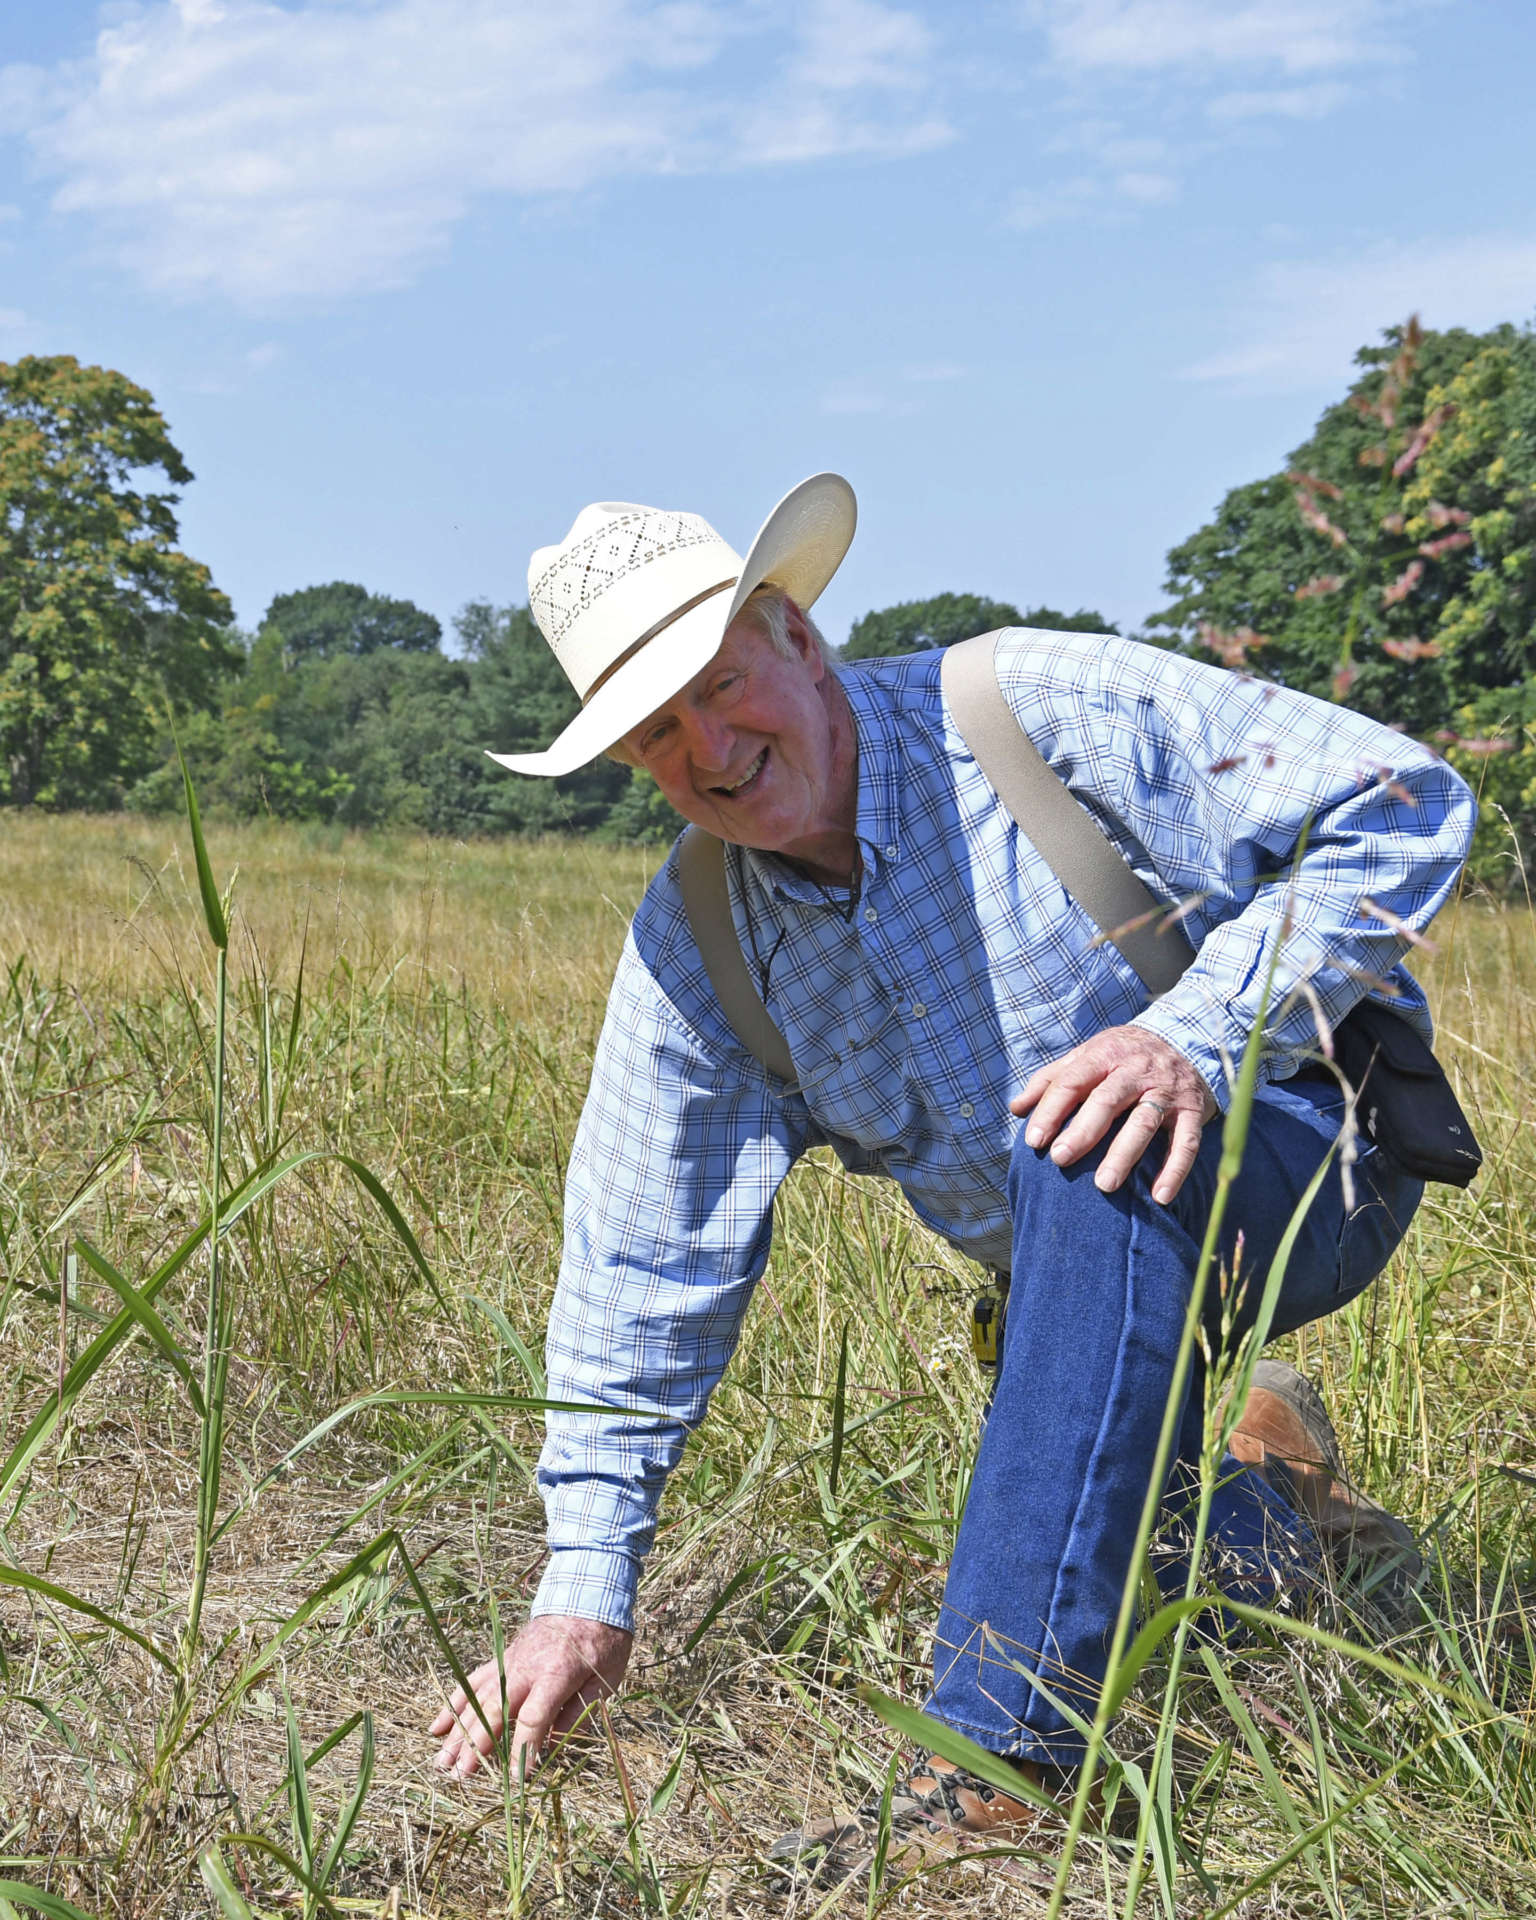 Paul Wilmoth kneeling in the incubator field showing vegetation planted to help rejuvinate the soil.